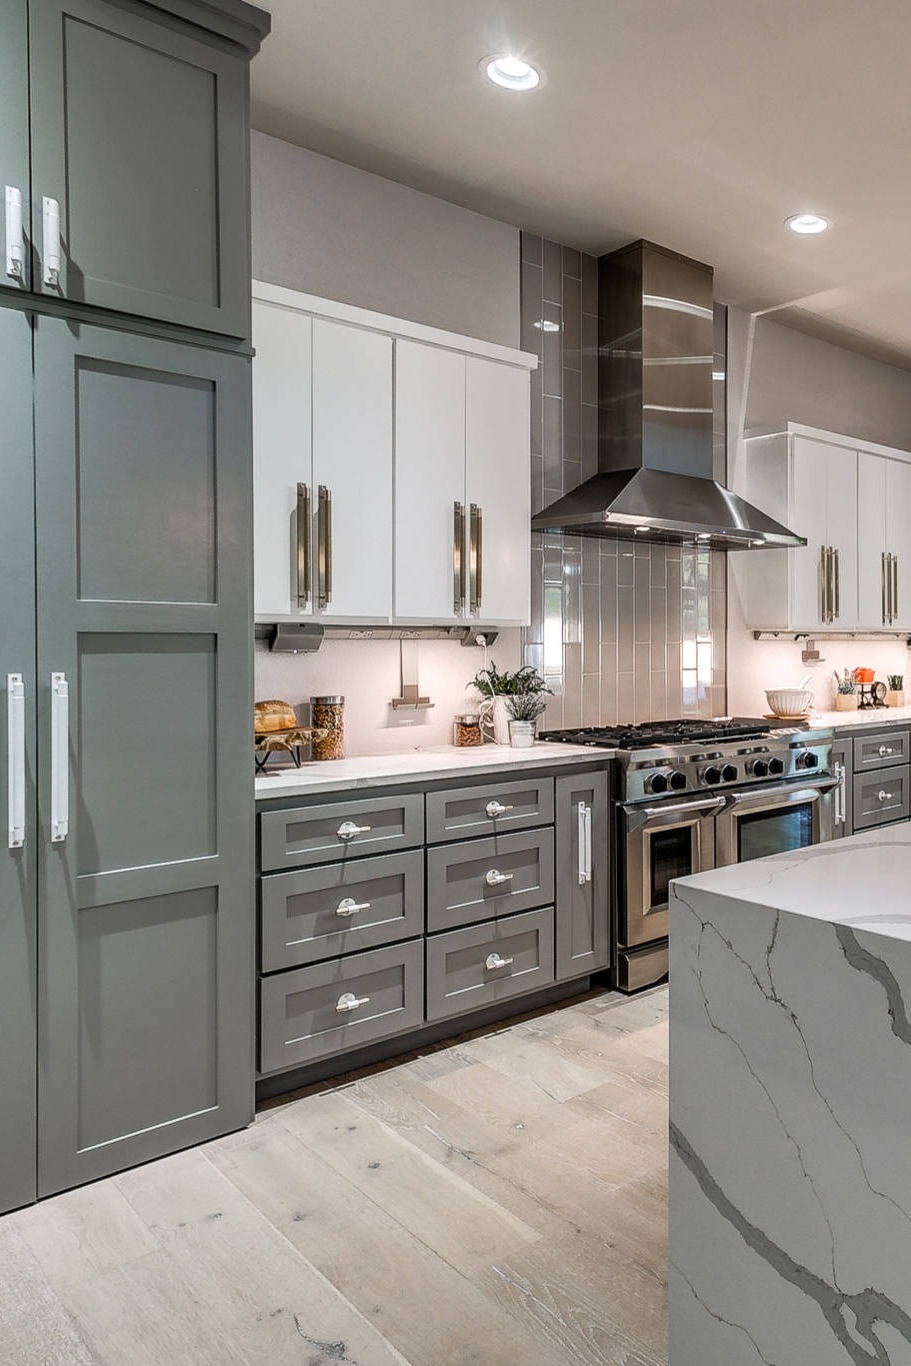 Shaker Style Cabinets Traditional Kitchen Quartz Countertop Warm Create White Marble Wood Gray Cabinets Space Brass